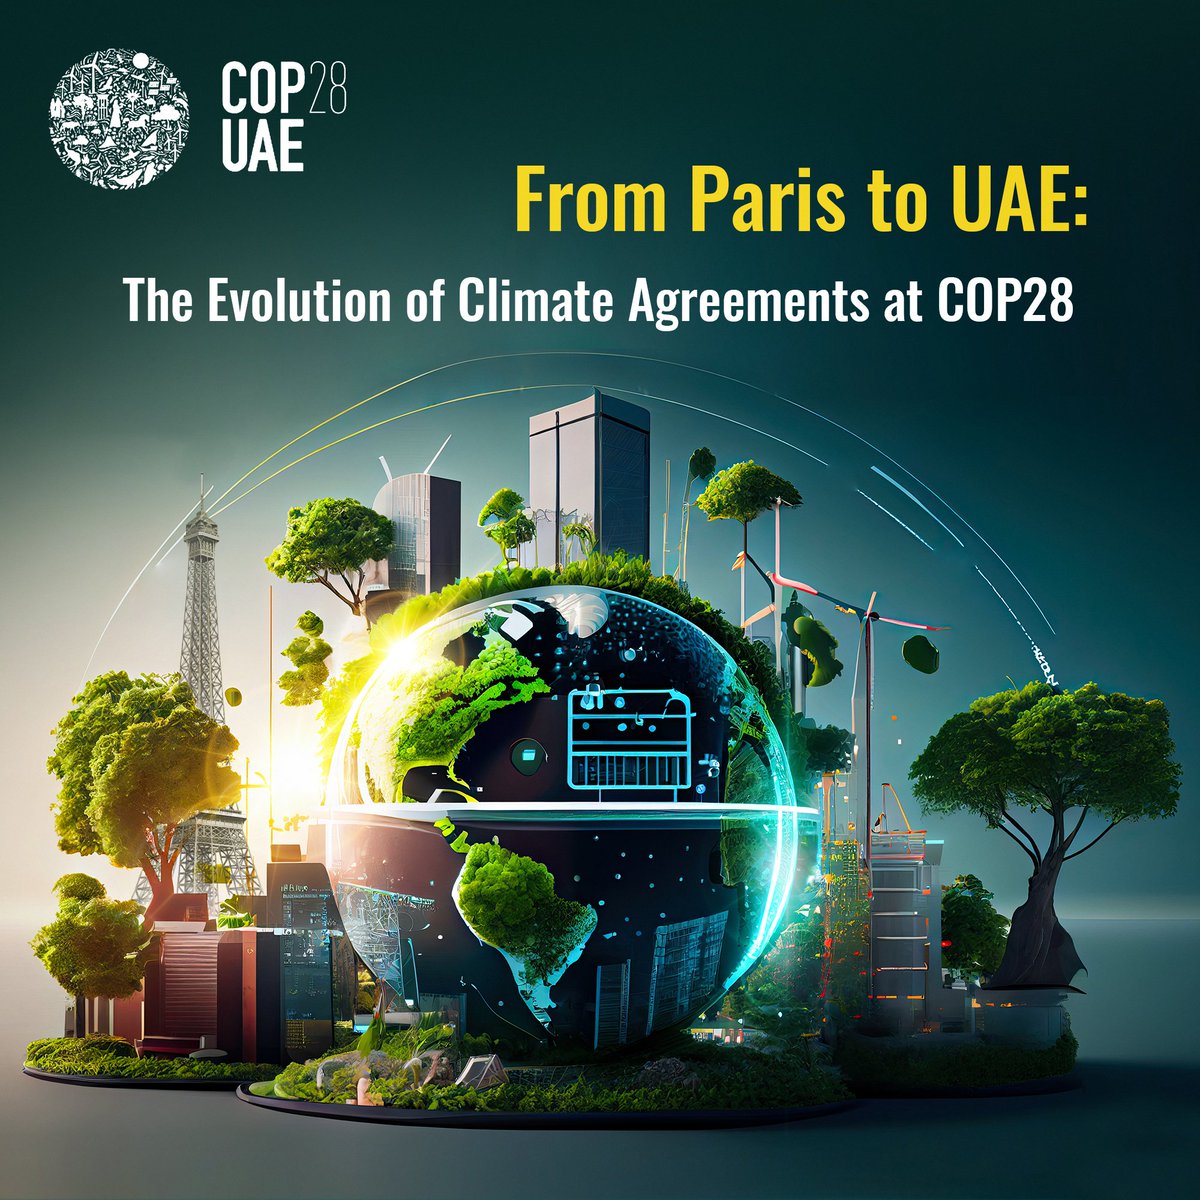 🤝 Tracing the journey from Paris to UAE, our commitment grows stronger.

With every ton of BFRP, Arab Basalt Fiber Company cuts 5.24 tons of coal-equivalent CO2 emissions. Sustainable evolution in action.

#COP28 #ClimateAction #ParisAgreement #ForThePlanet #SustainabilityNow